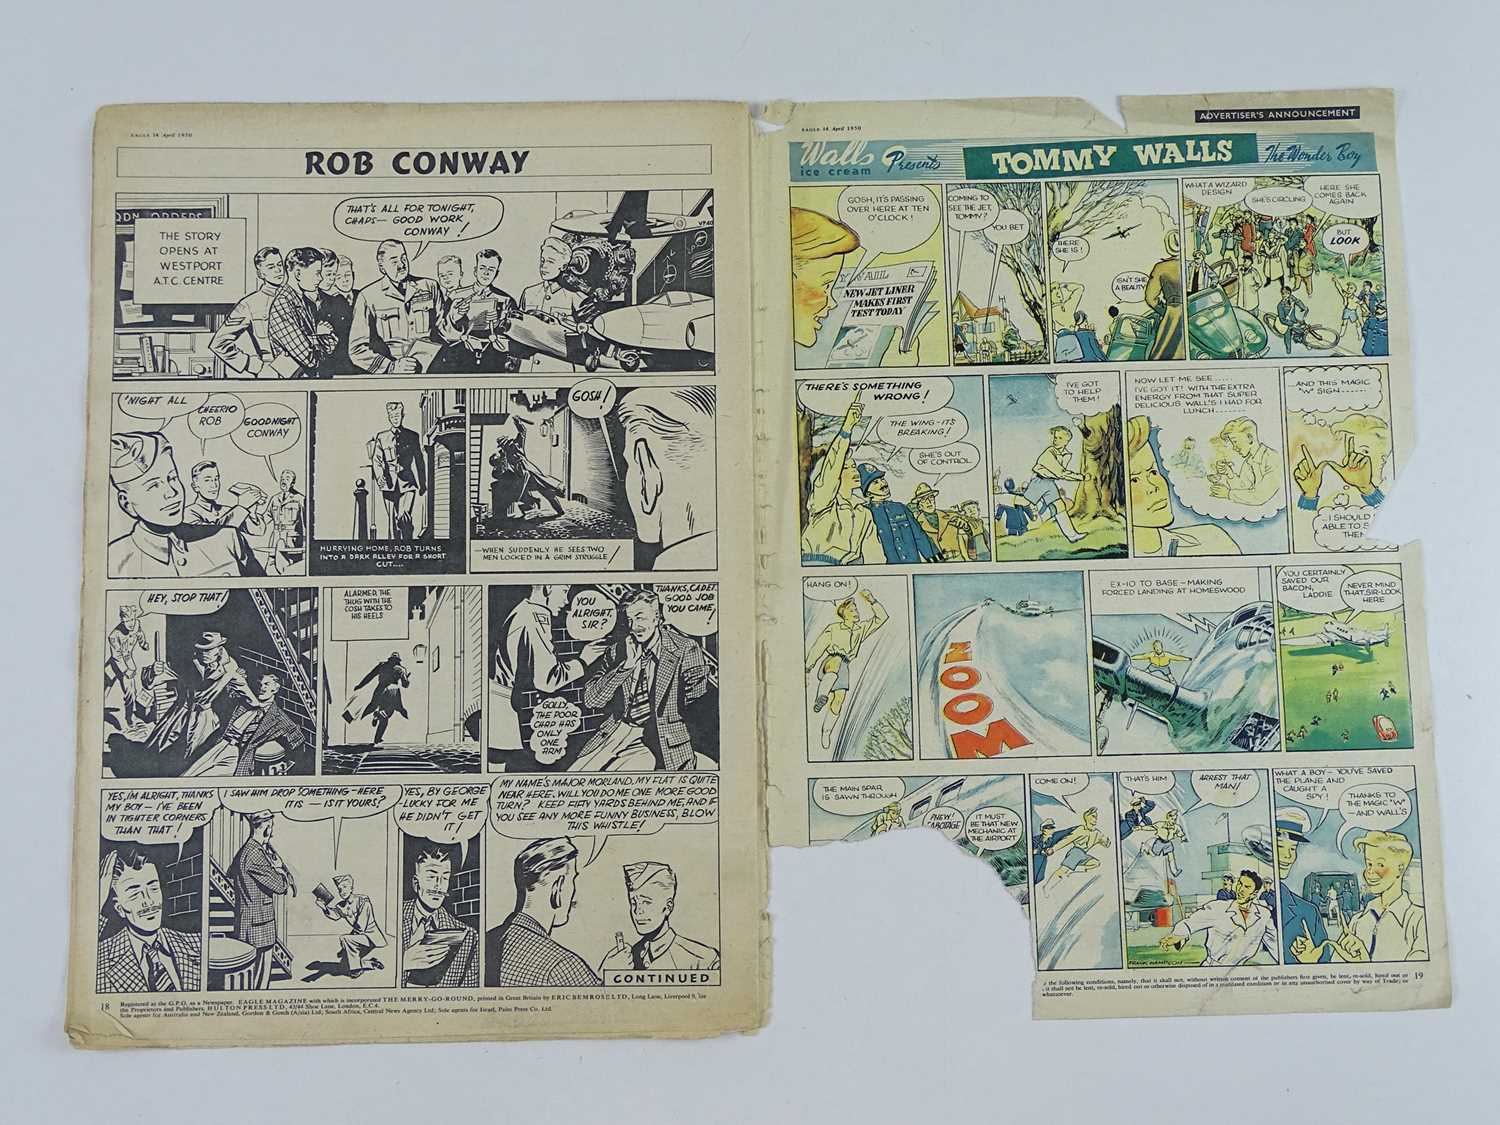 EAGLE COMIC LOT (53 in Lot) - (1950 - Hulton Press / IPC Magazines) Includes complete Fifty-Two (52) - Image 5 of 8